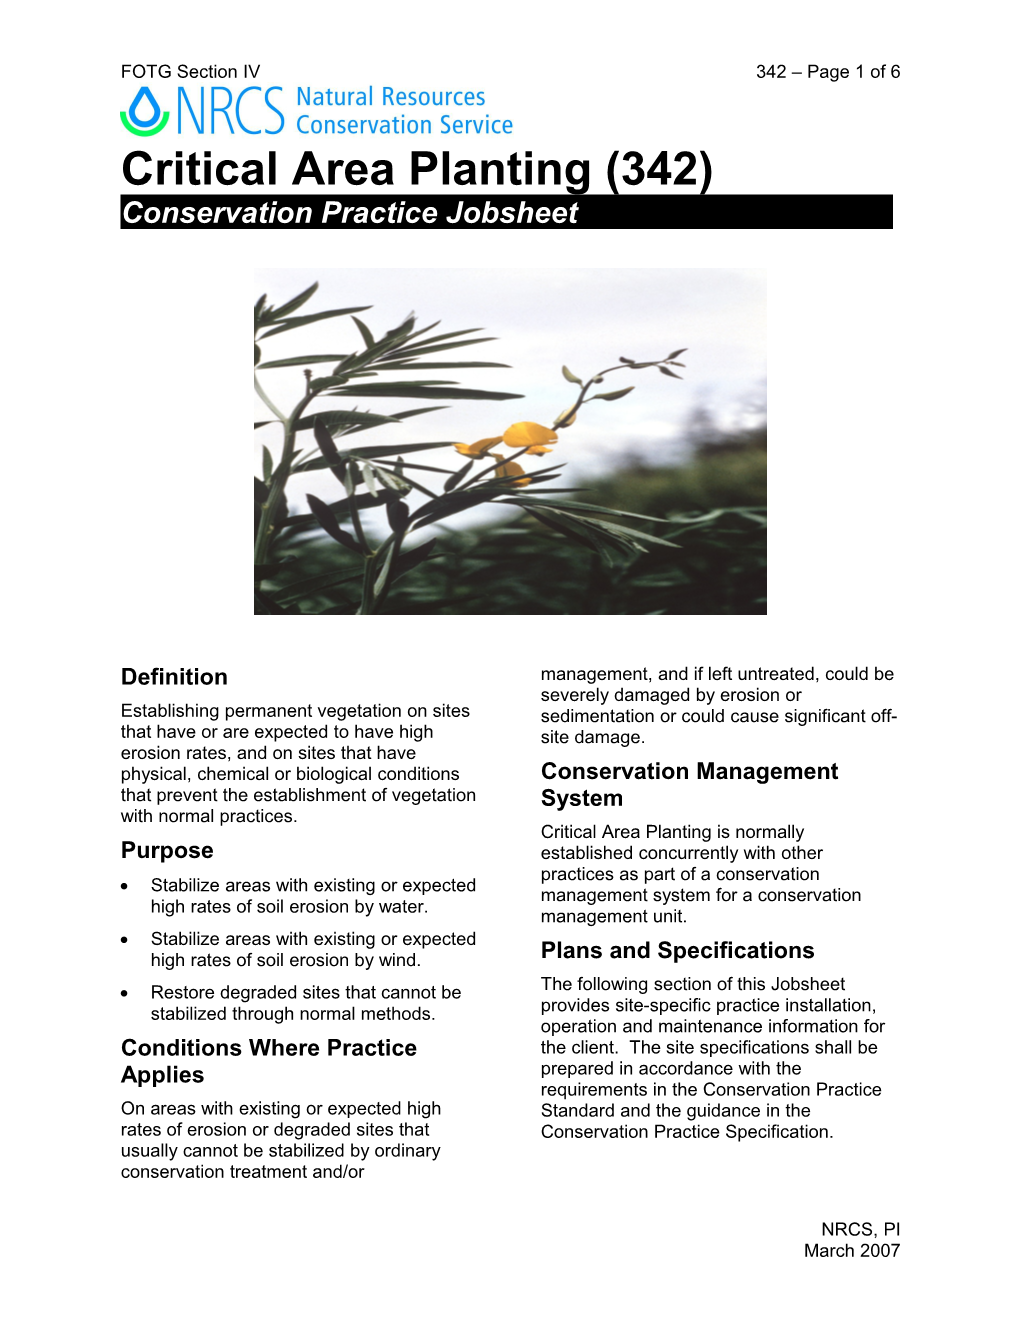 Critical Area Planting (342) s1